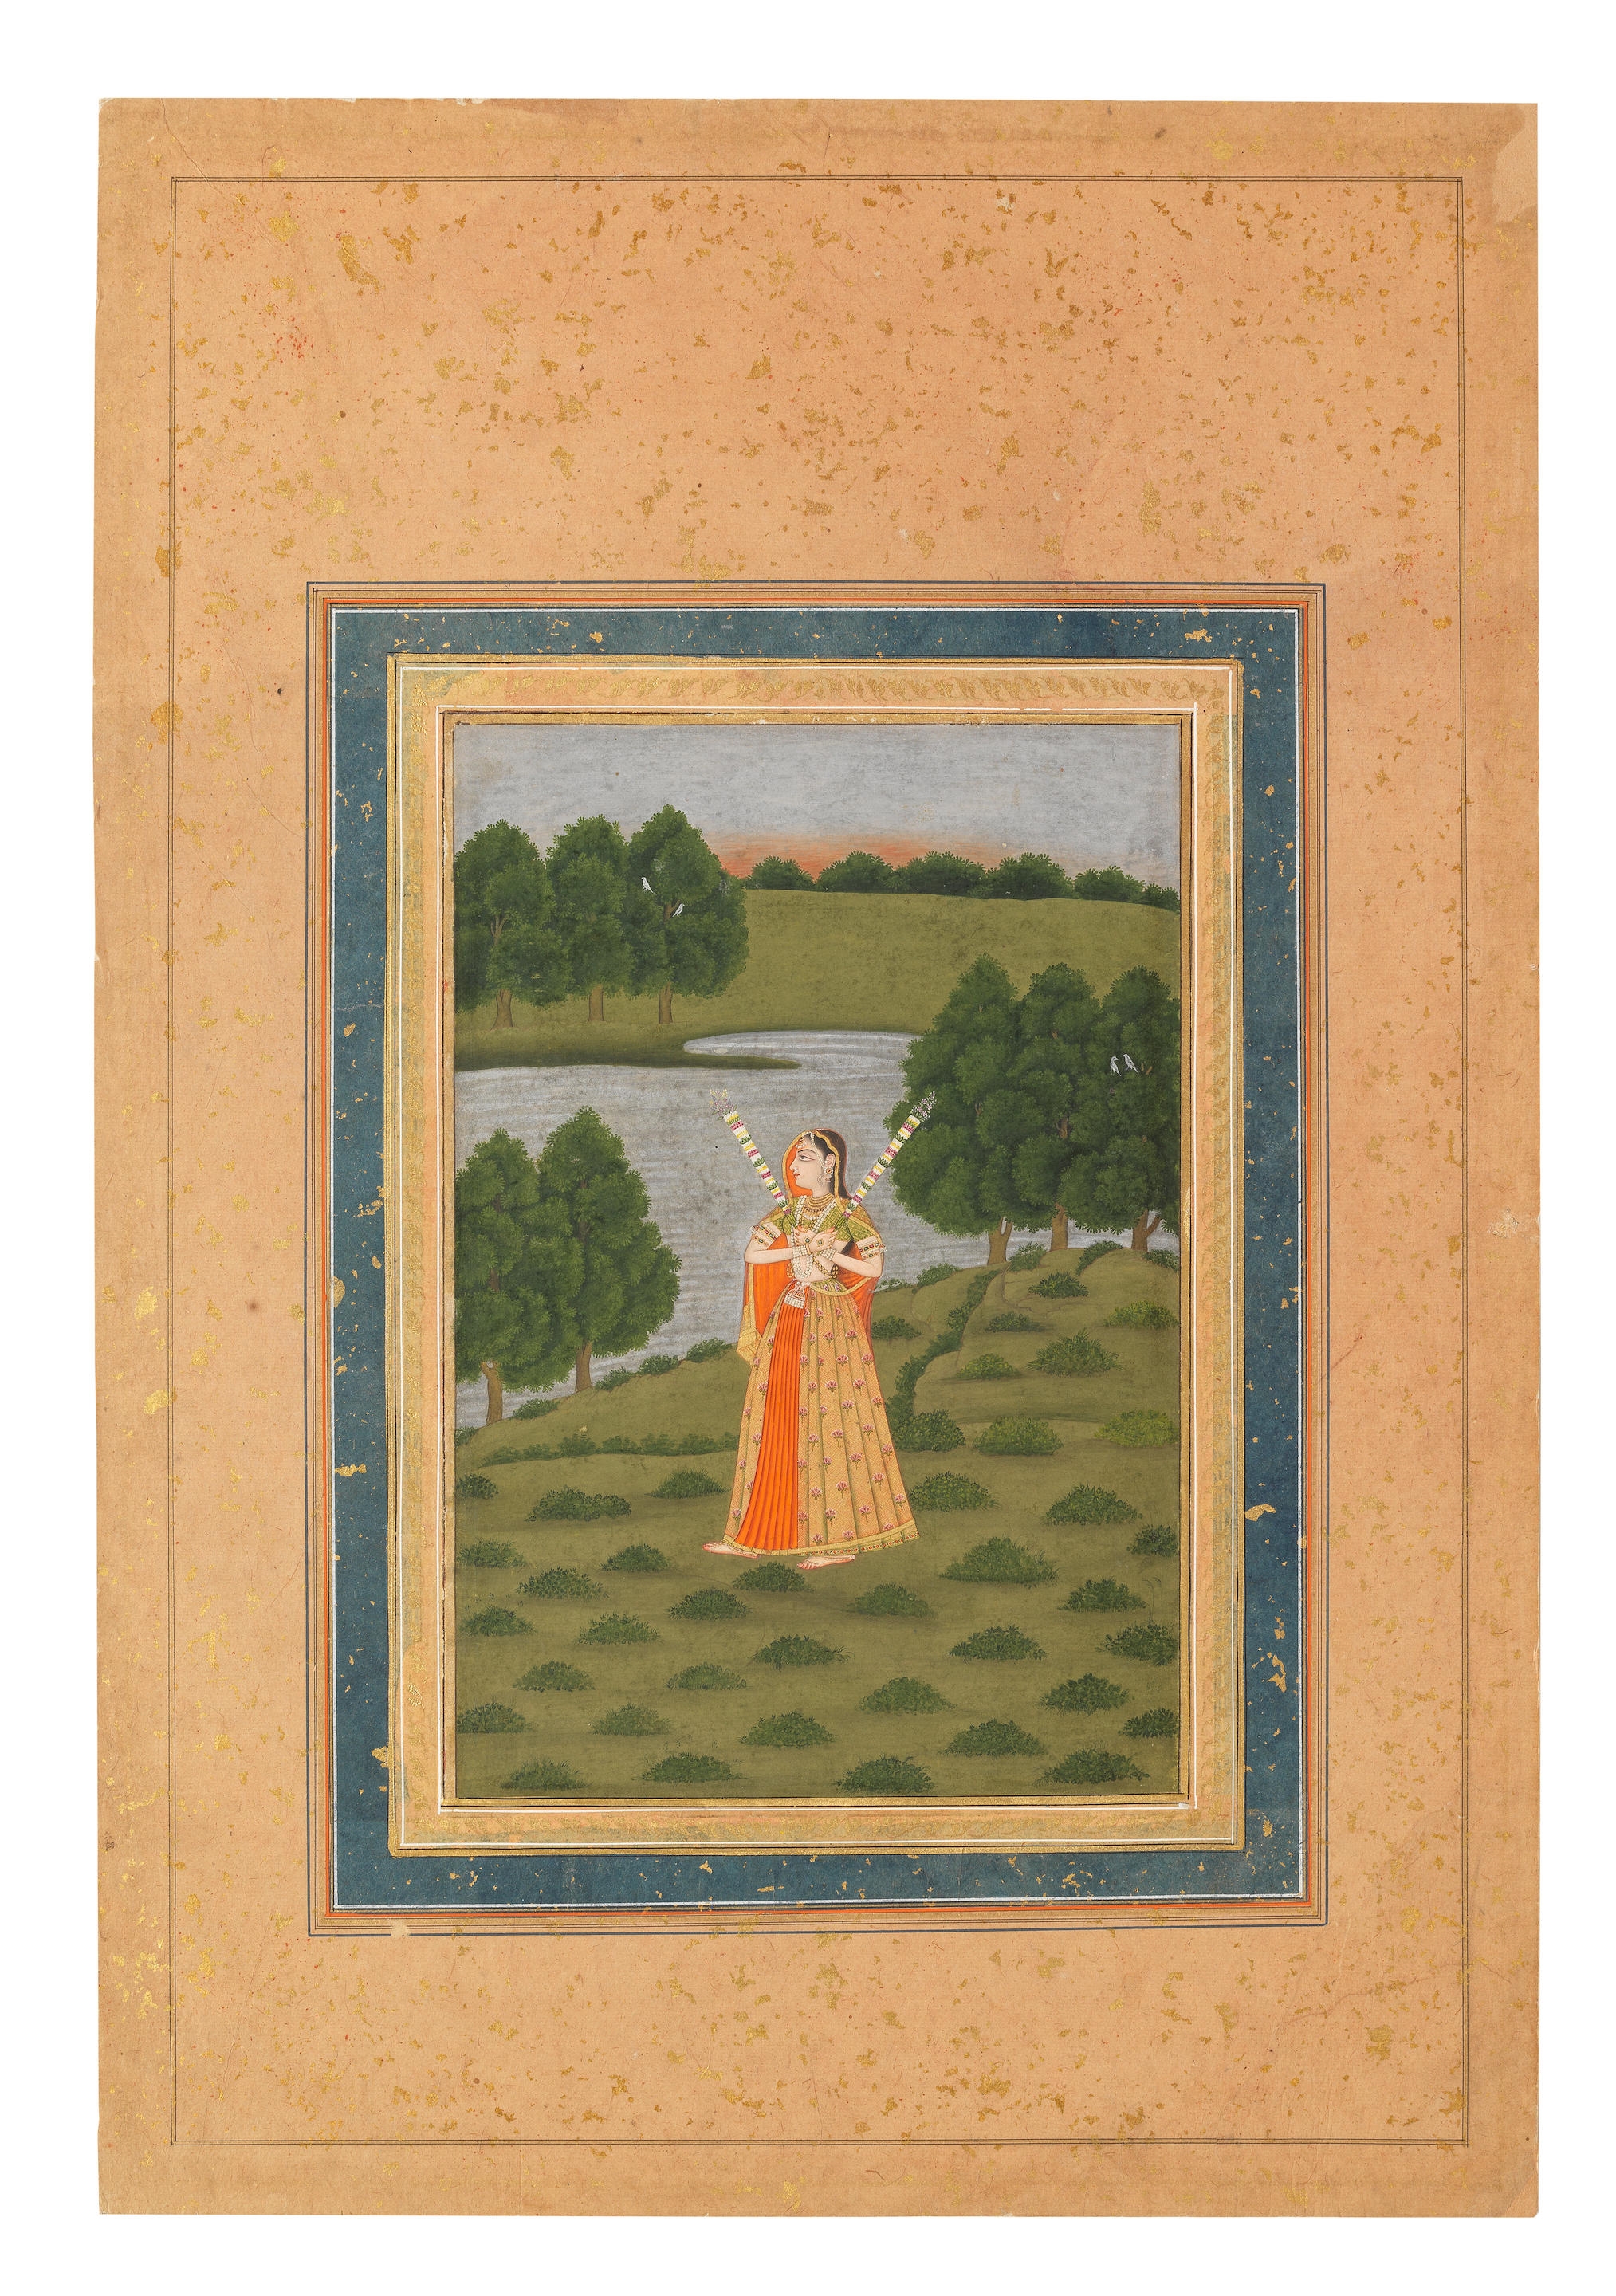 Gauri ragini : a maiden in a landscape holding decorated floral wands; verso, a calligraphic composition by Mughal School, 18th Century, Murid Khan Tabataba, circa 1730-1740